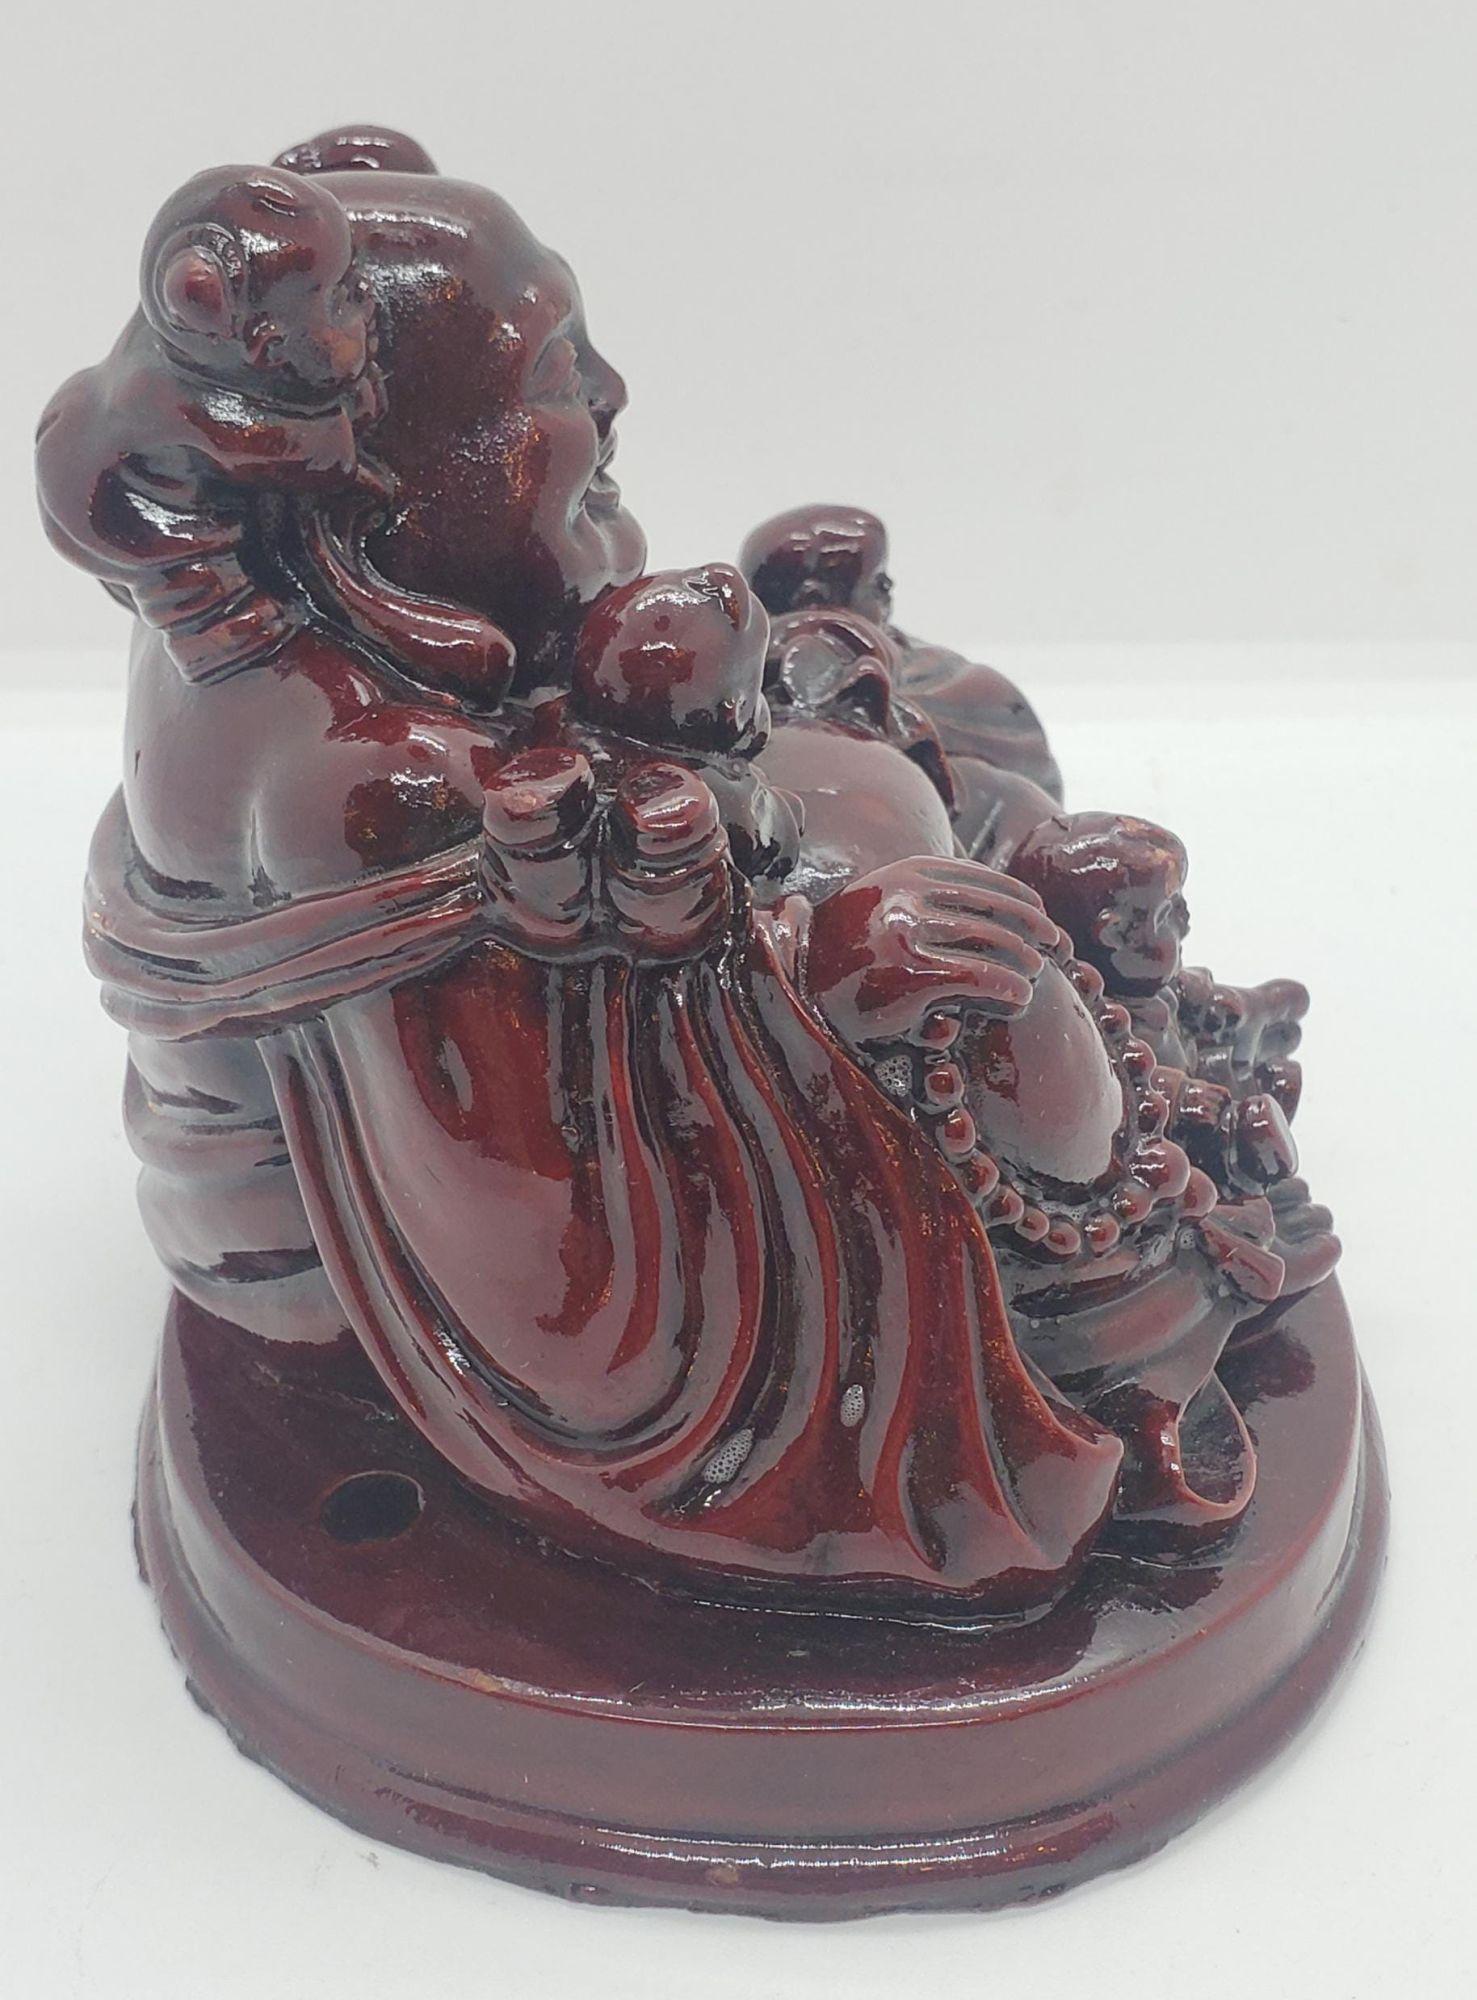 Mid Century polished Wooden Happy Buddha Sculpture surrounded by children.
